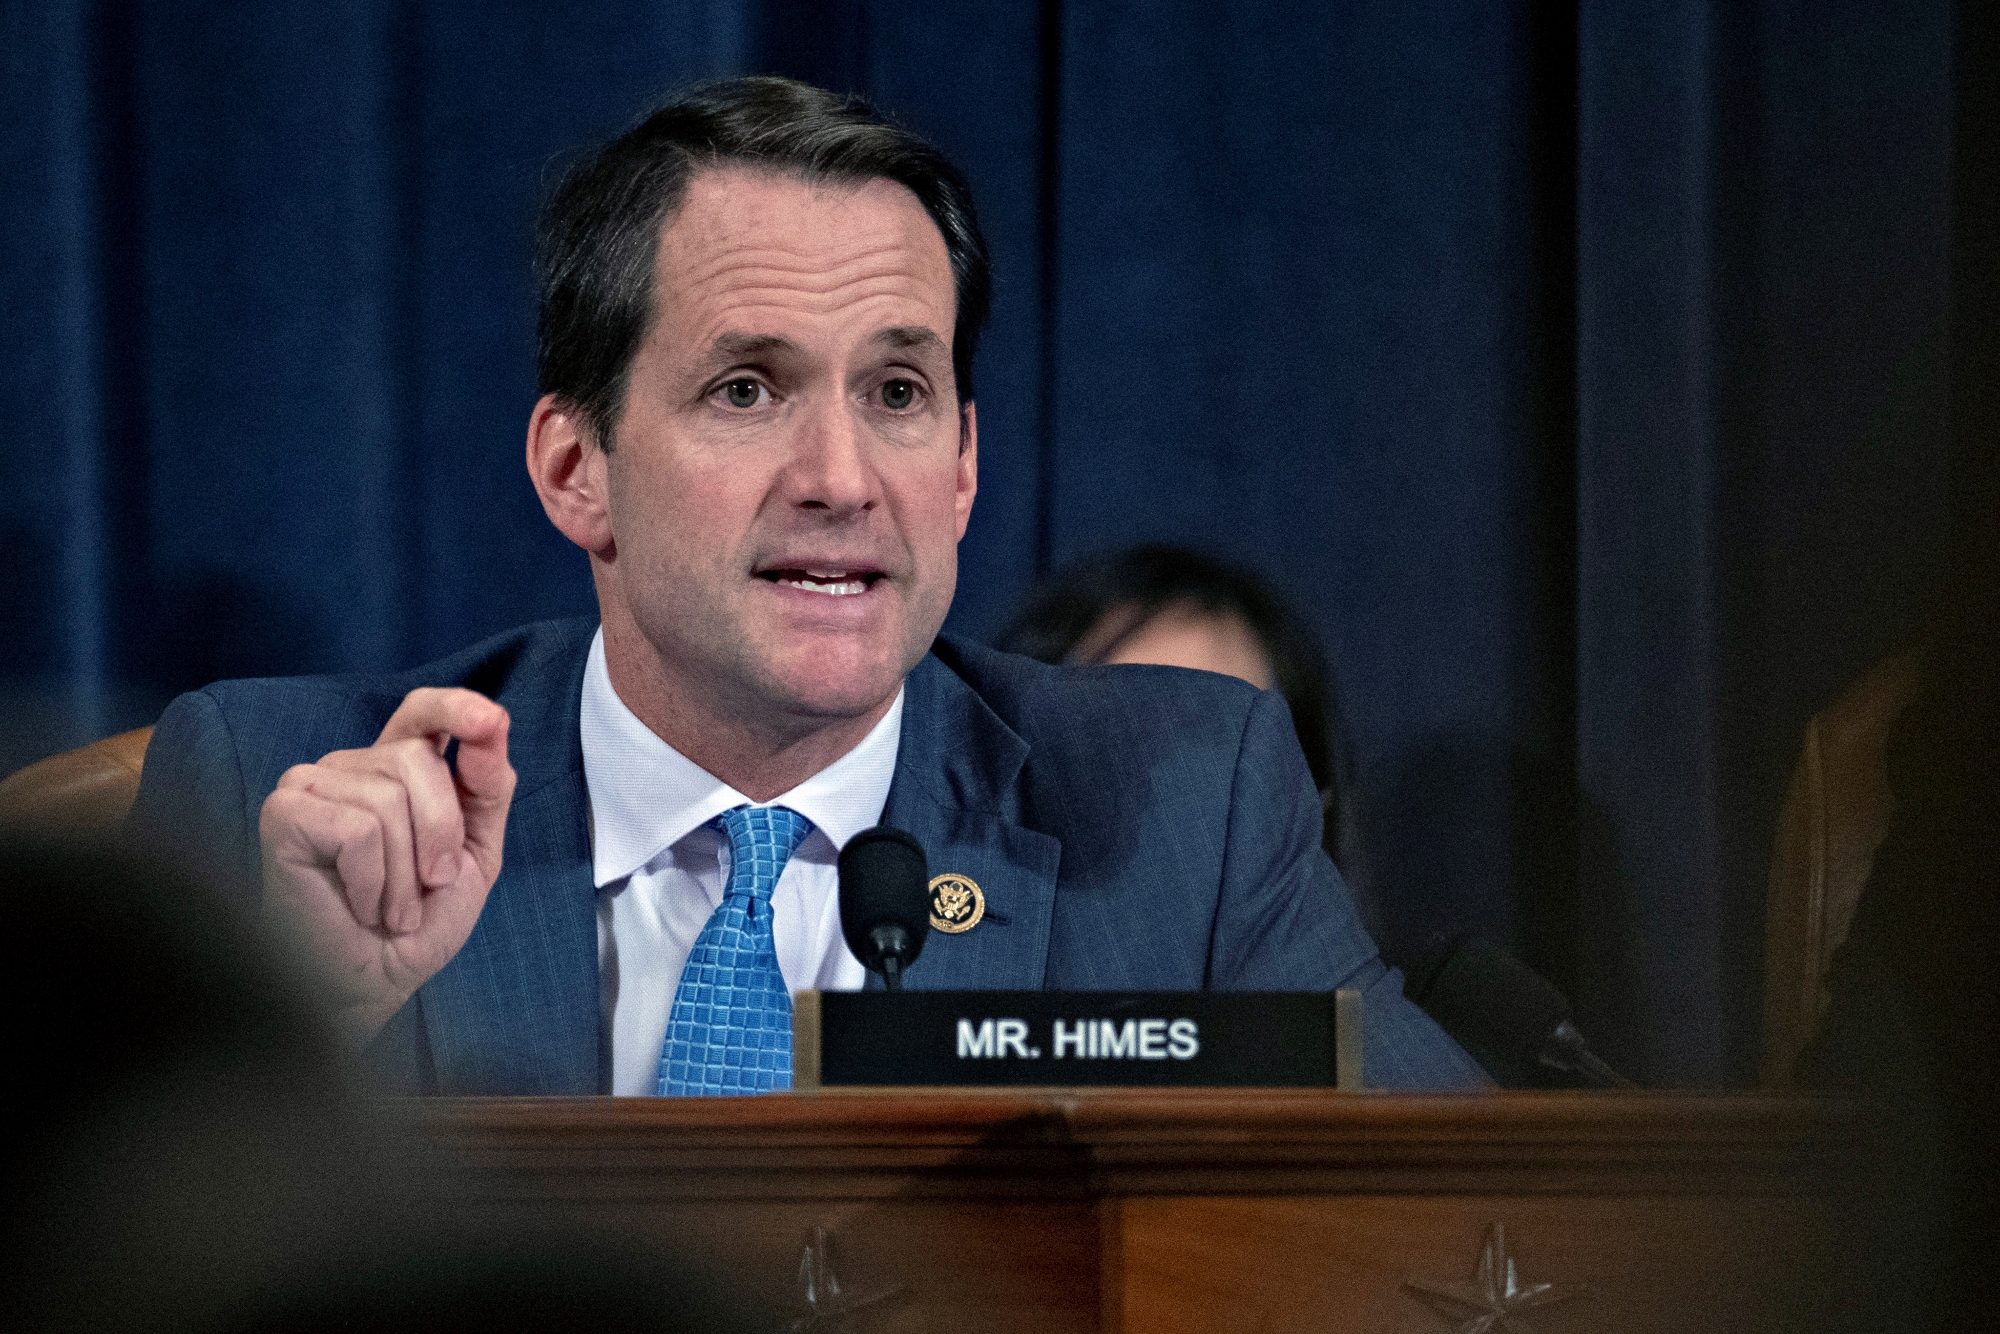 The Lisa Wexler Show – Congressman Jim Himes On Israel And The Child Tax Credit Expansion